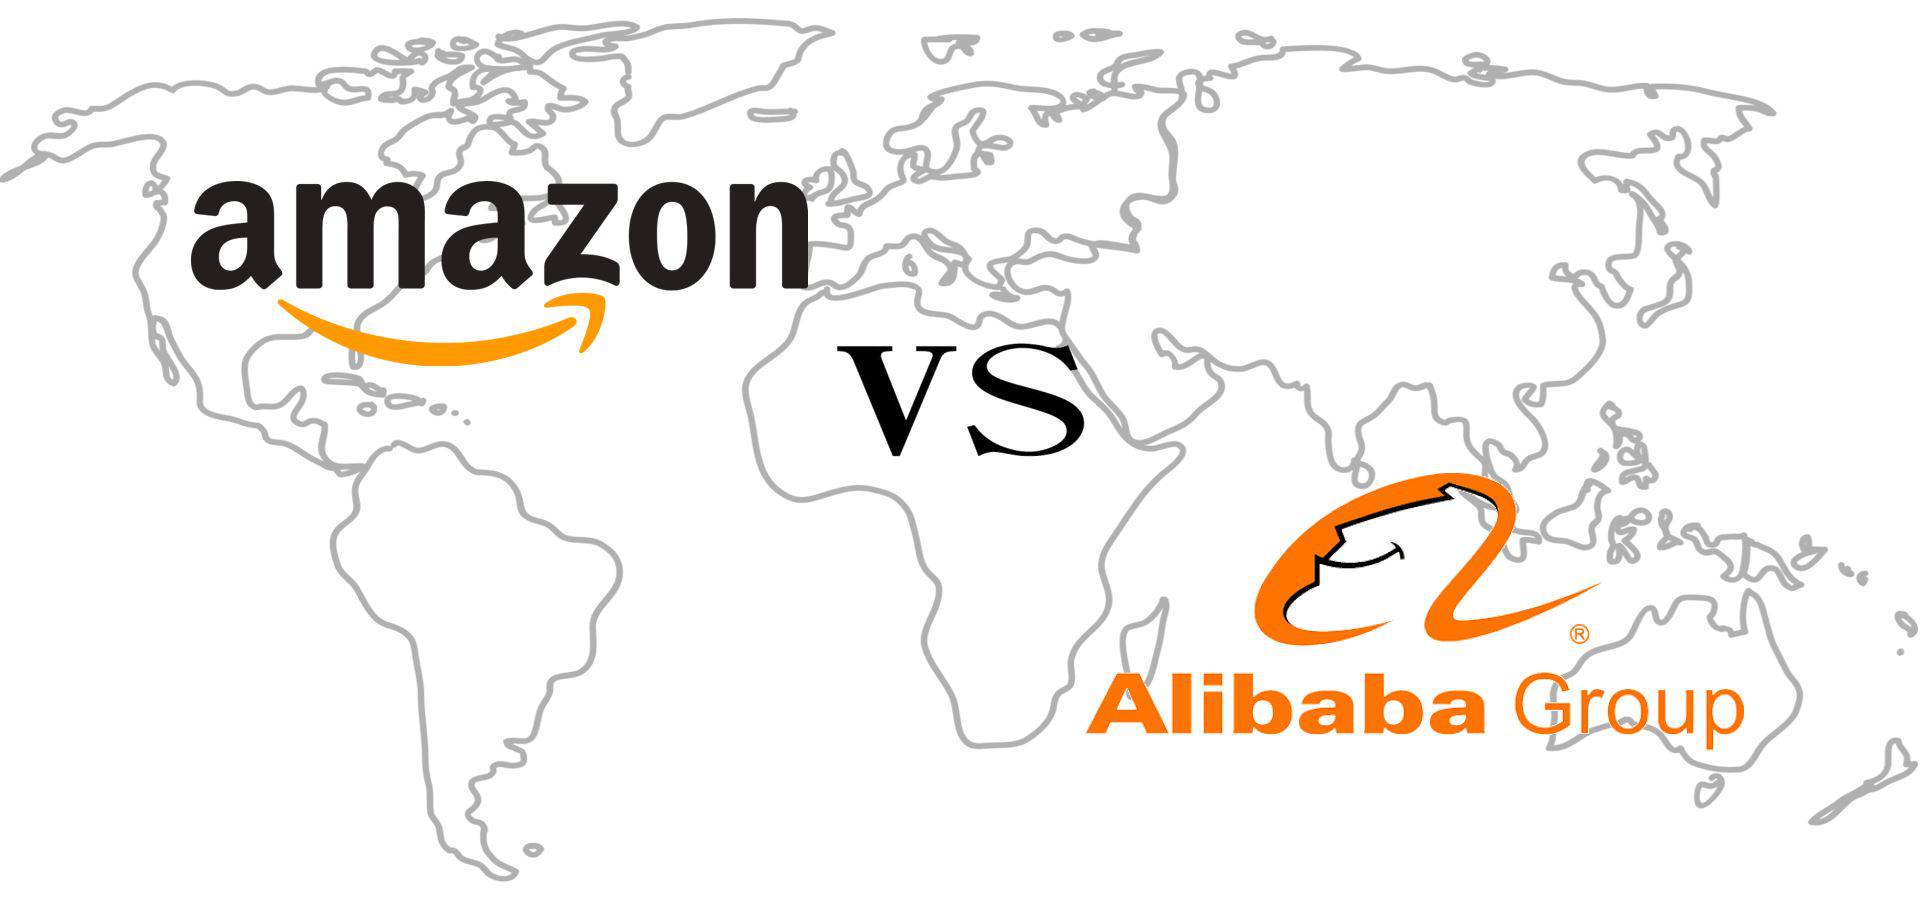 Amazon Vs Alibaba How The E Commerce Giants Stack Up In The Fight To Go Global